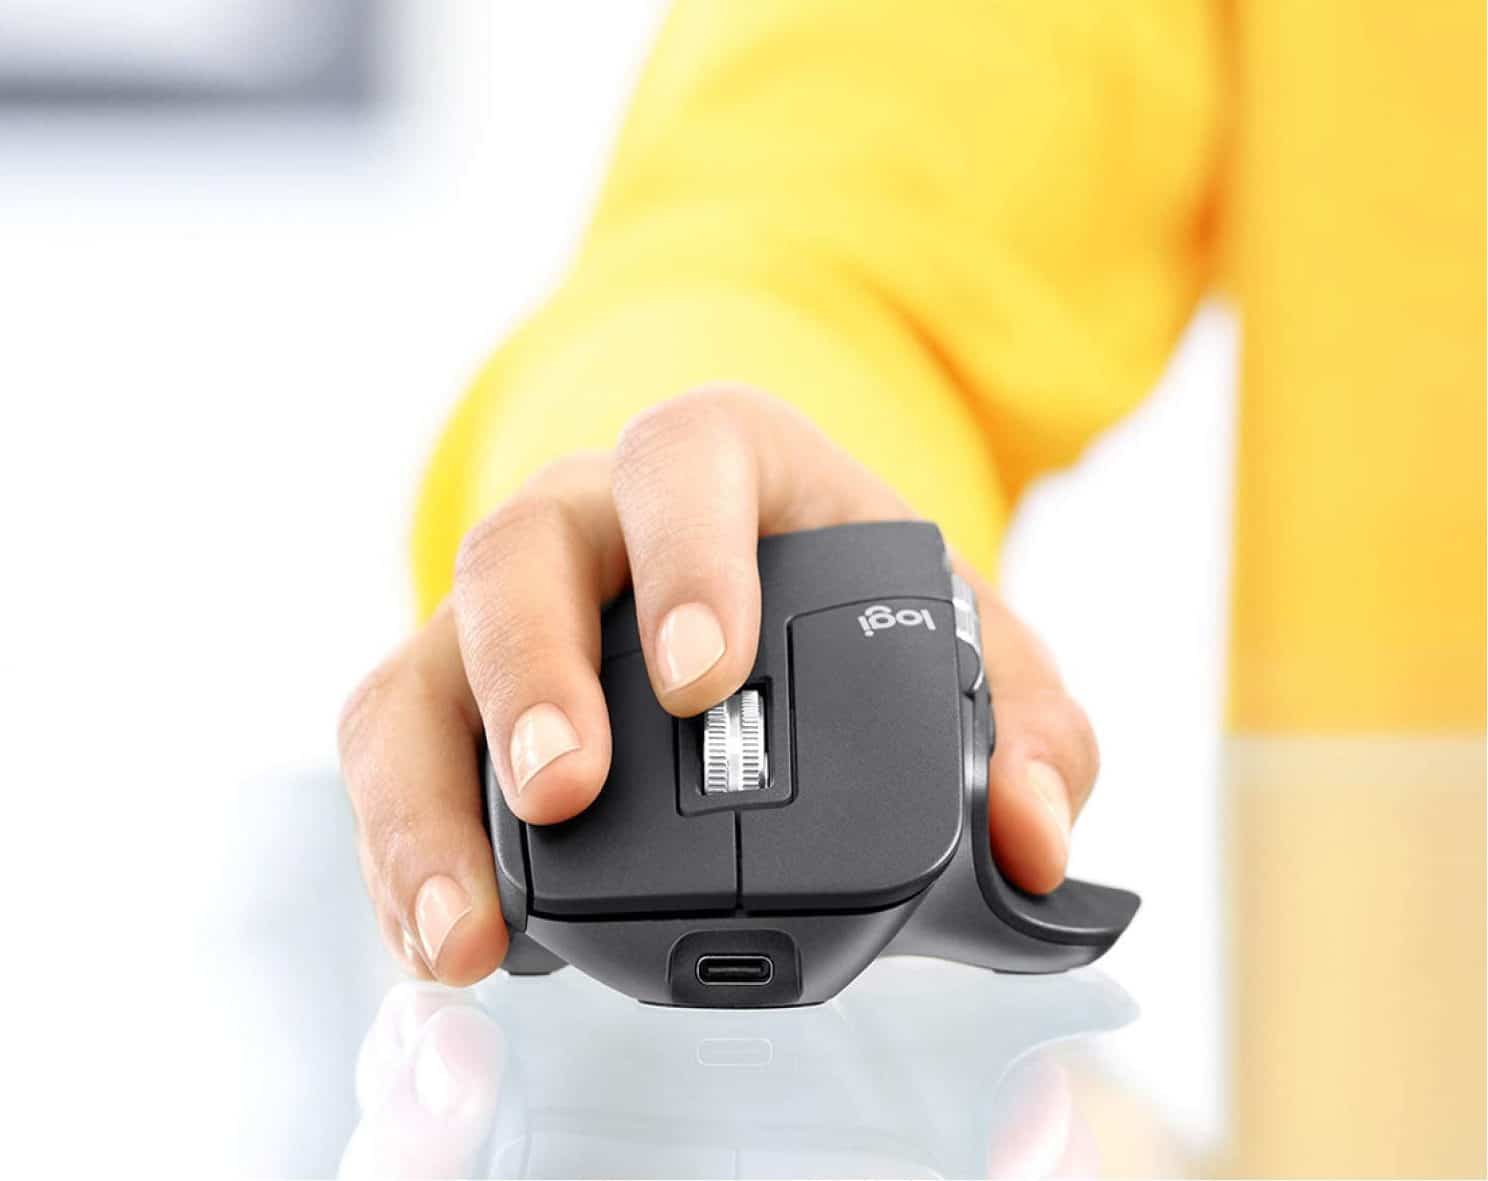 5 Best Ergonomic Mouse for Large Hands in 2022 - PC Gear Lab